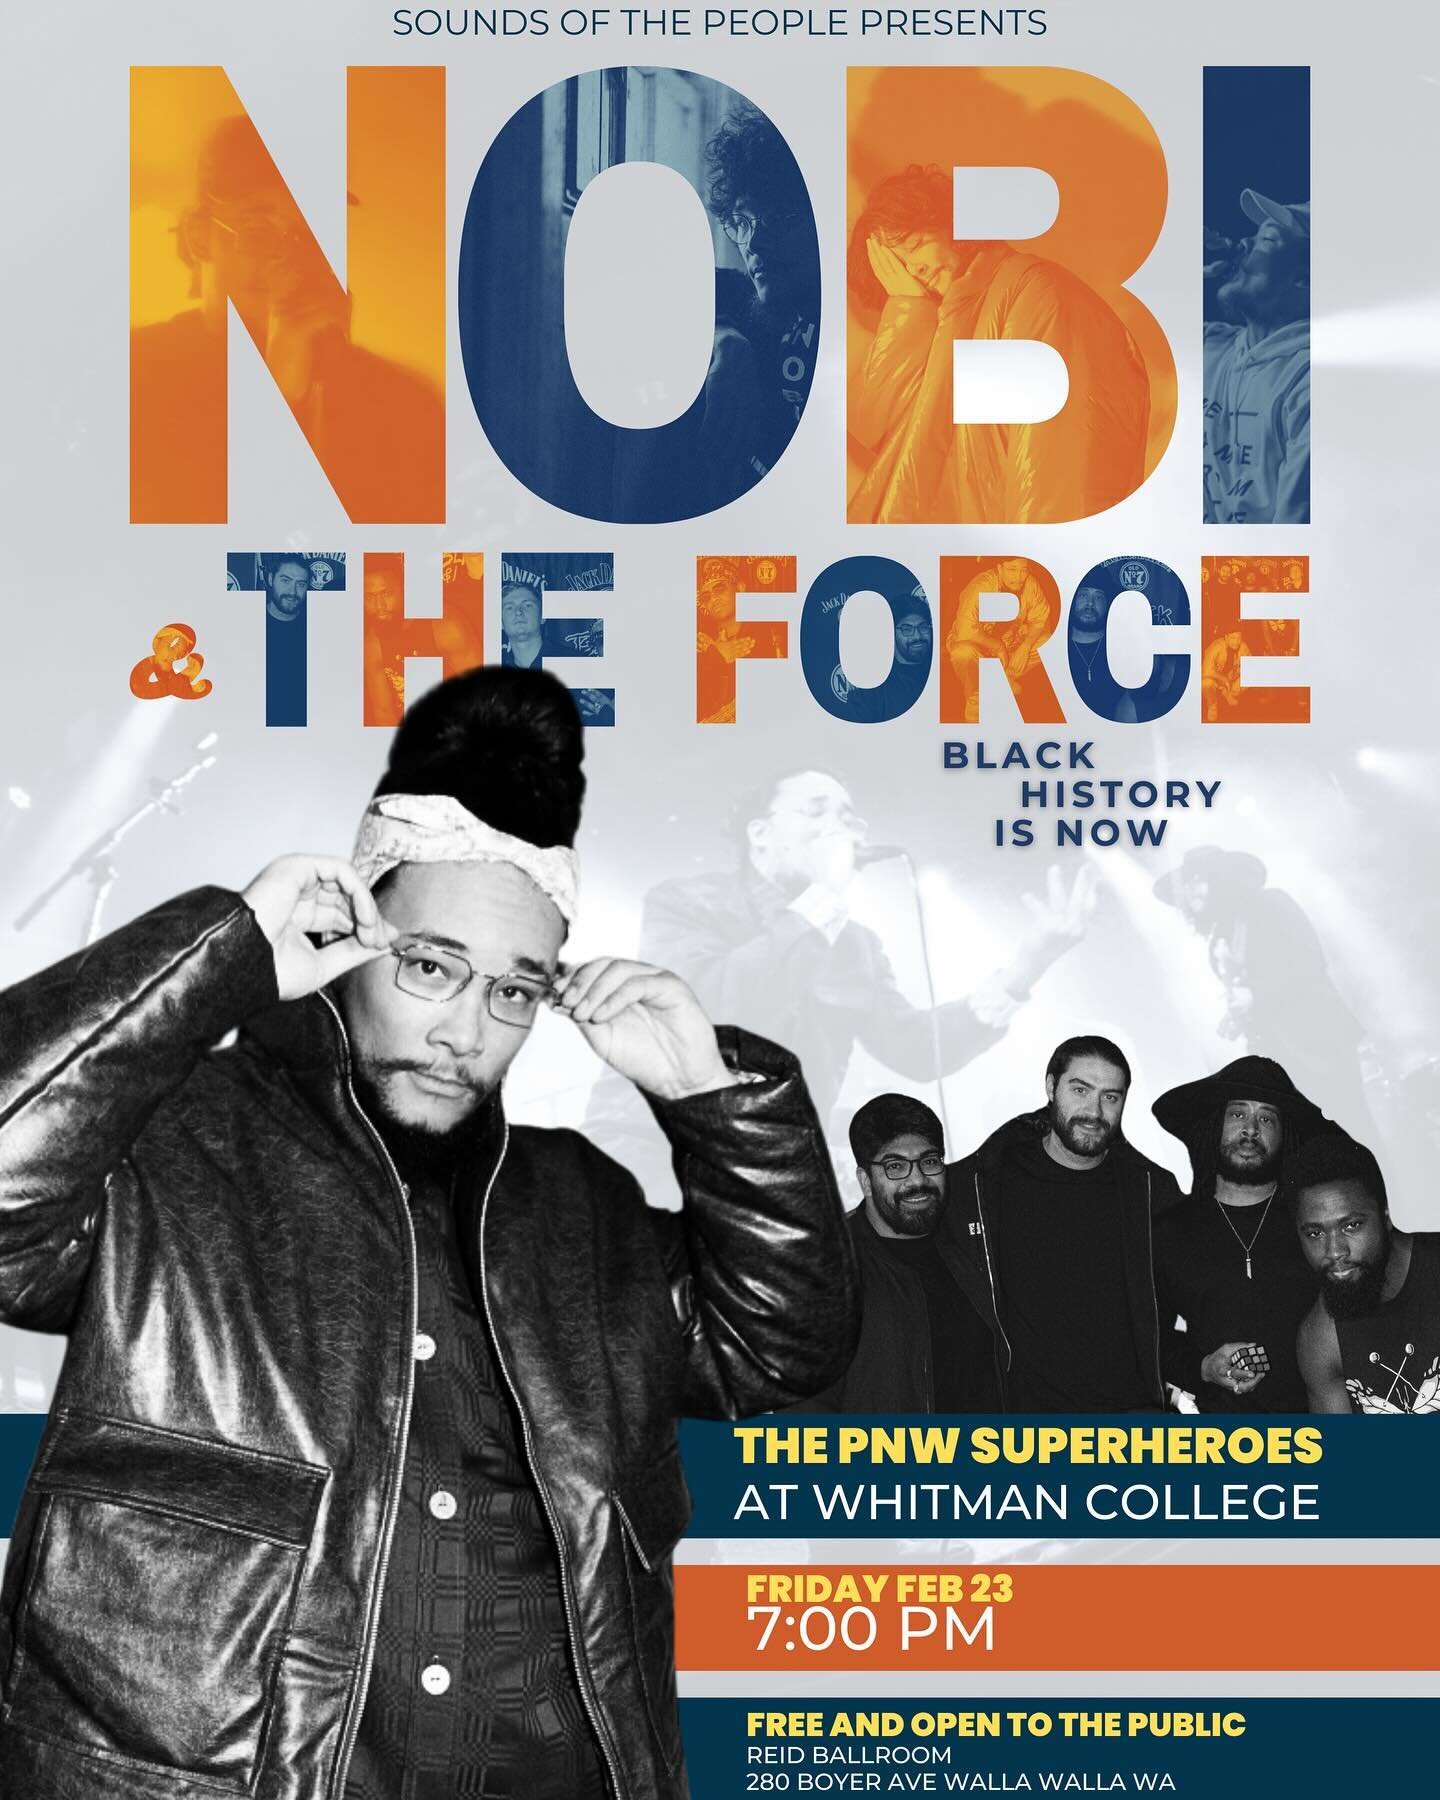 Drumroll please!!! Introducing the supporting act for our FREE Whitman College show on Feb 23 at 7pm at the Reid Ballroom: NOBI AND THE FORCE!

Originally from the Tri-Cities, Nobi is an MC who naturally blends into wide ranges of instrumentation lik